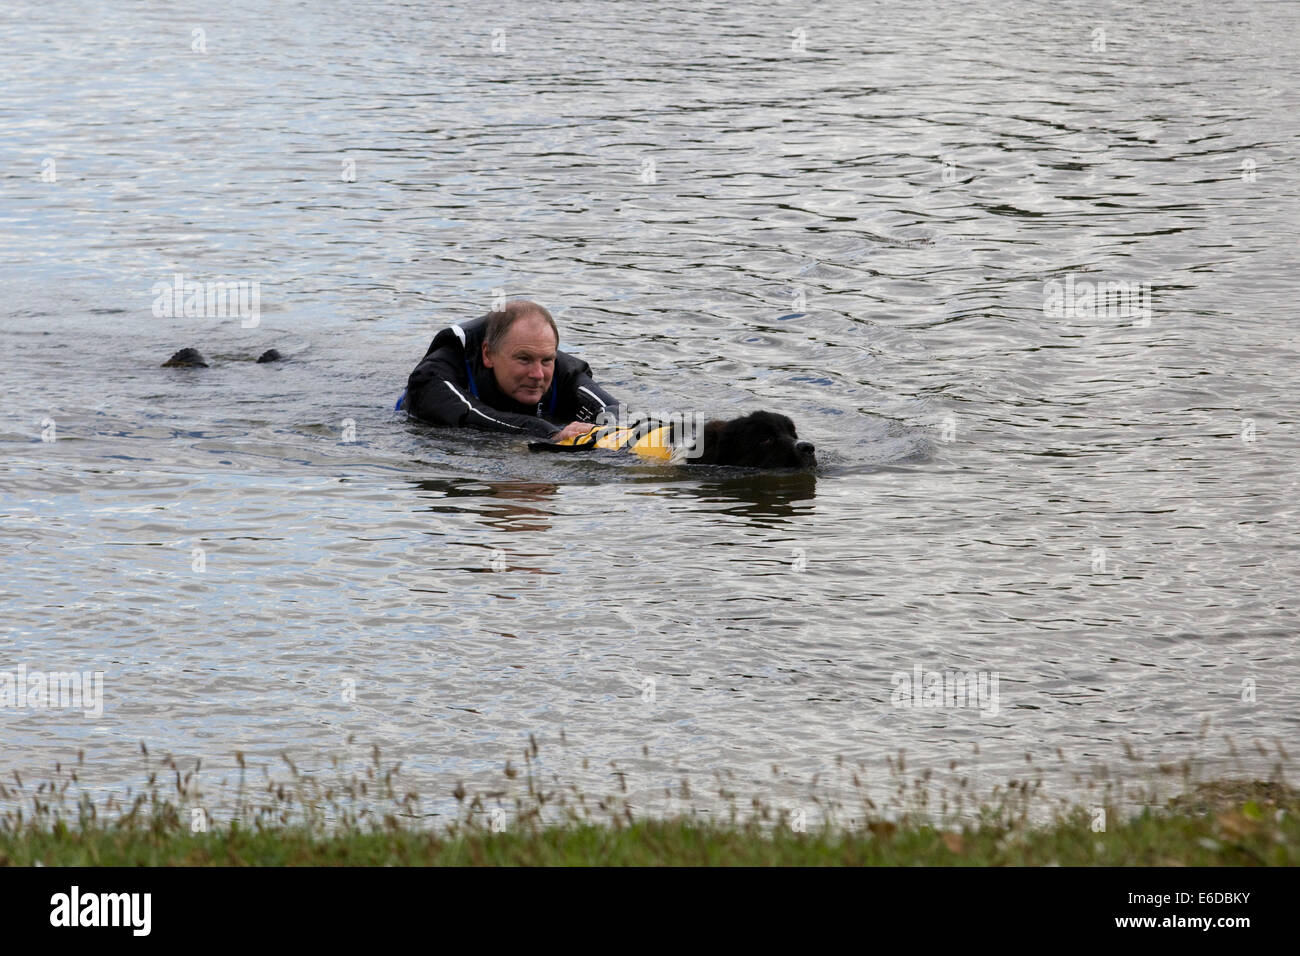 Newfoundland Dog rescuing a man in the water Stock Photo